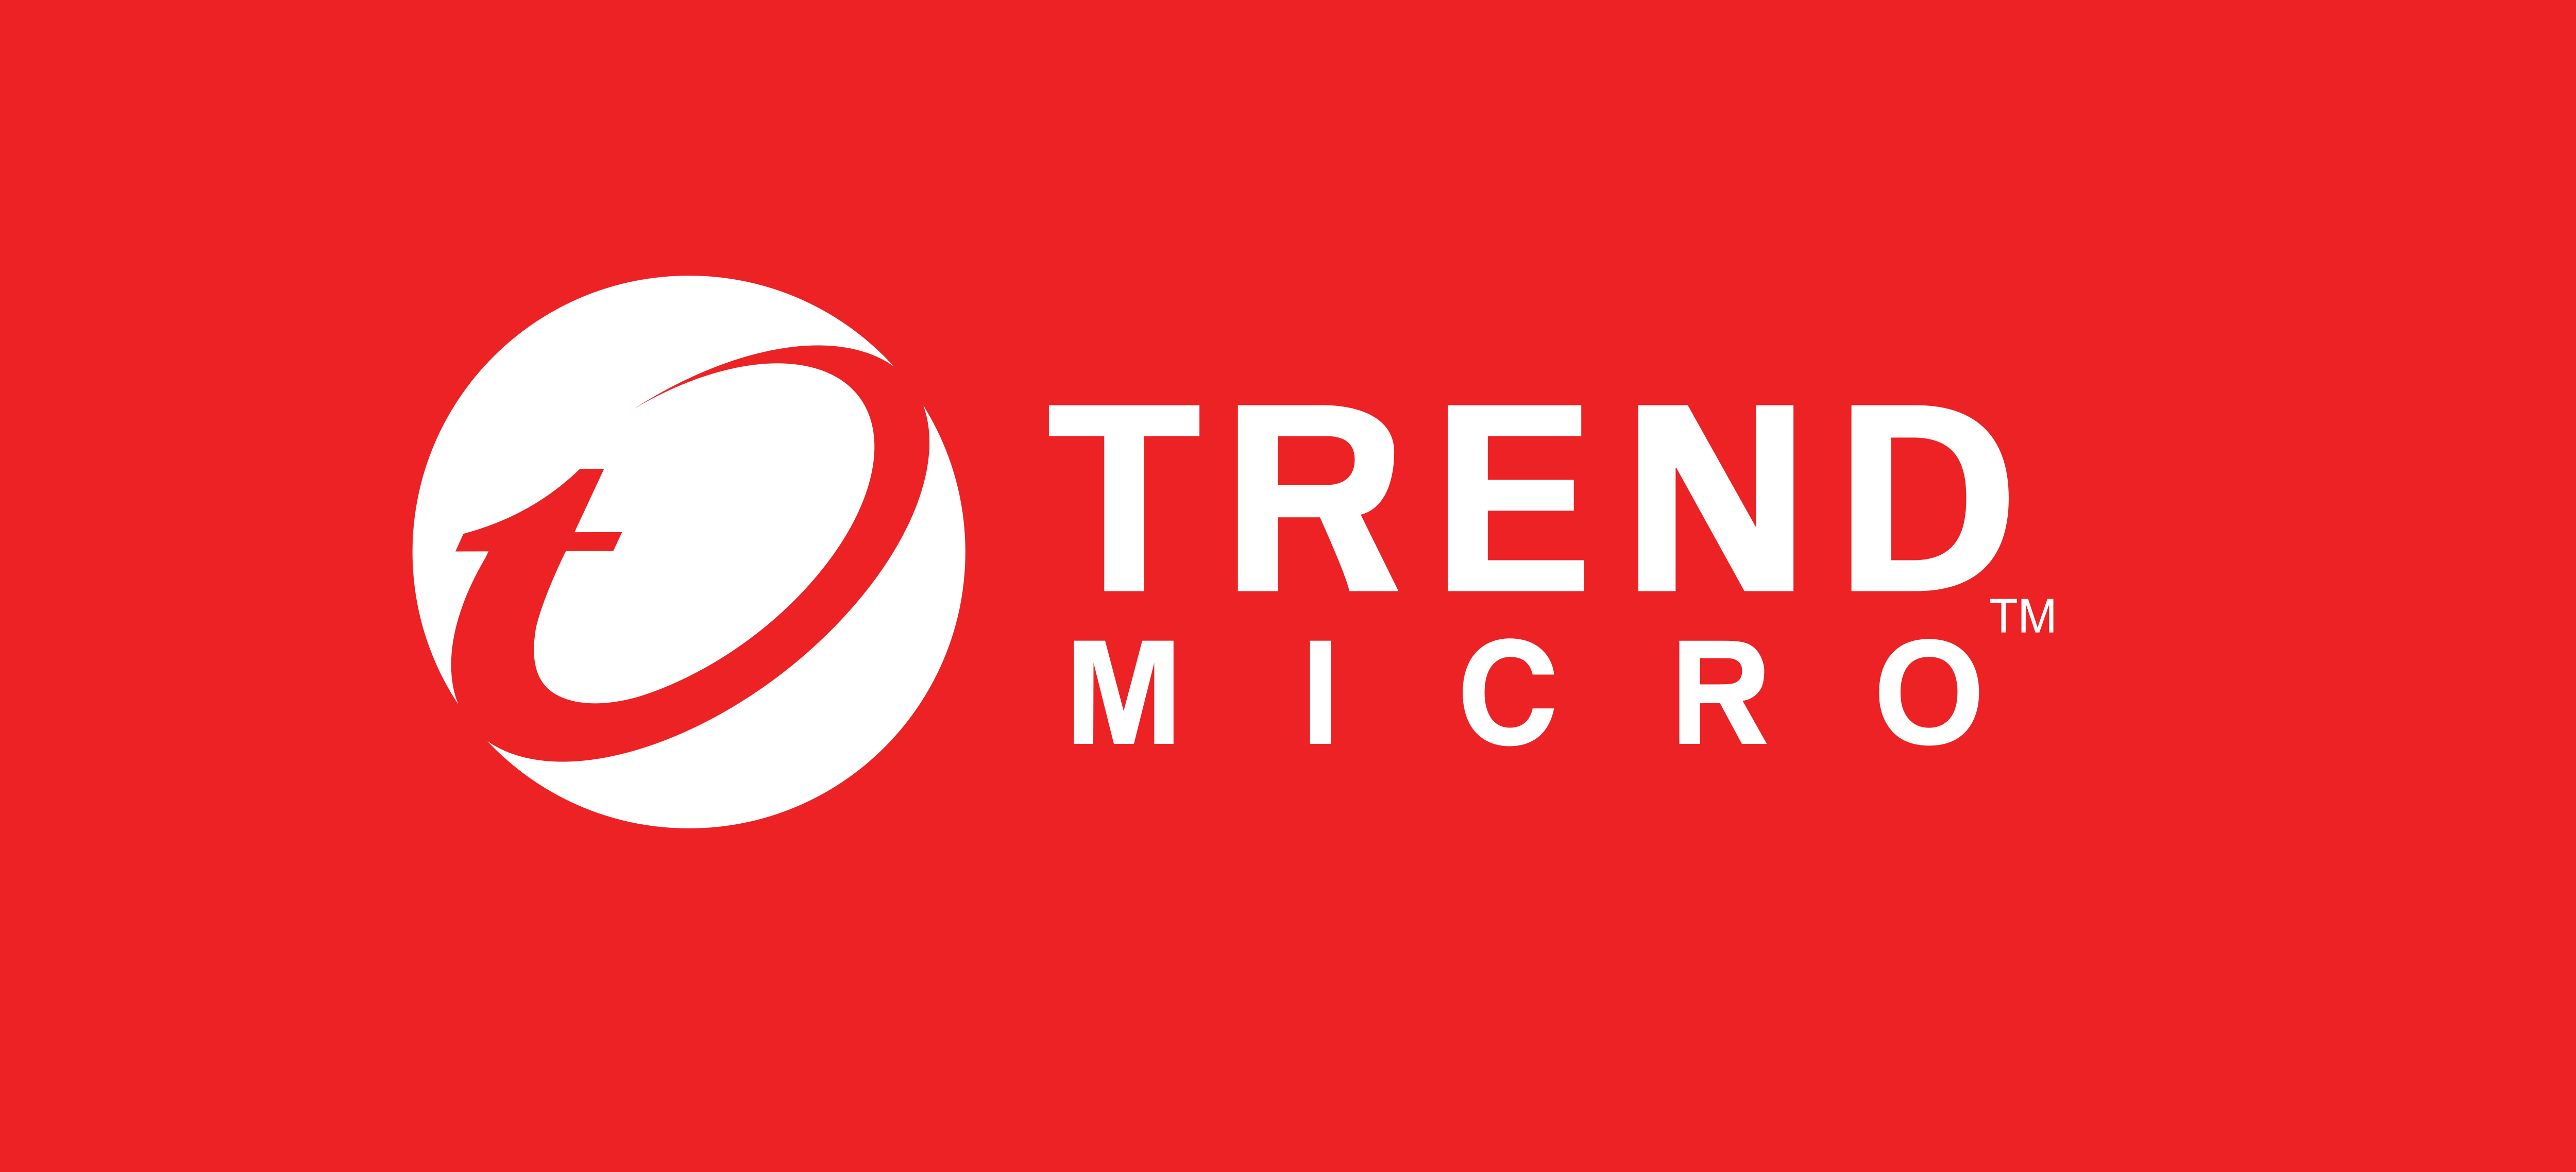 Trend_Micro_Logo_red_background.png